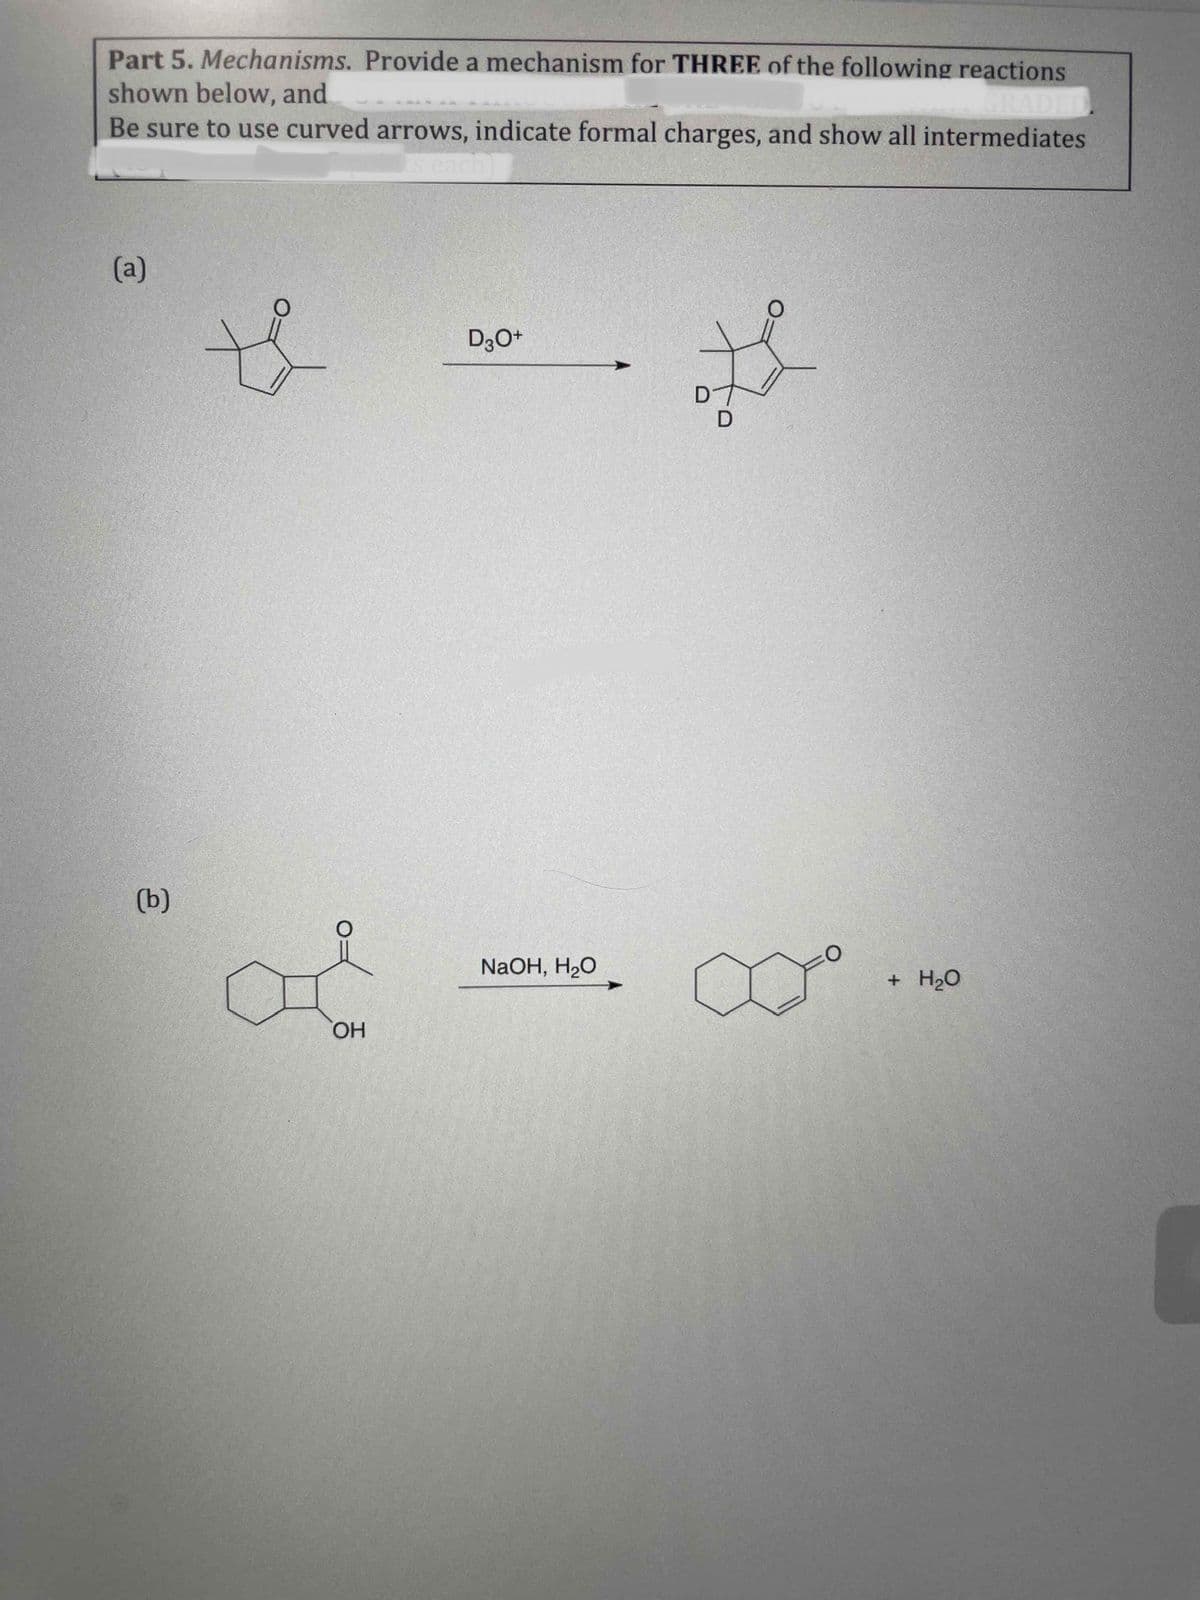 Part 5. Mechanisms. Provide a mechanism for THREE of the following reactions
shown below, and
Be sure to use curved arrows, indicate formal charges, and show all intermediates
GRADED
s each
(a)
D3O+
(b)
NaOH, H2O
H20
HO
